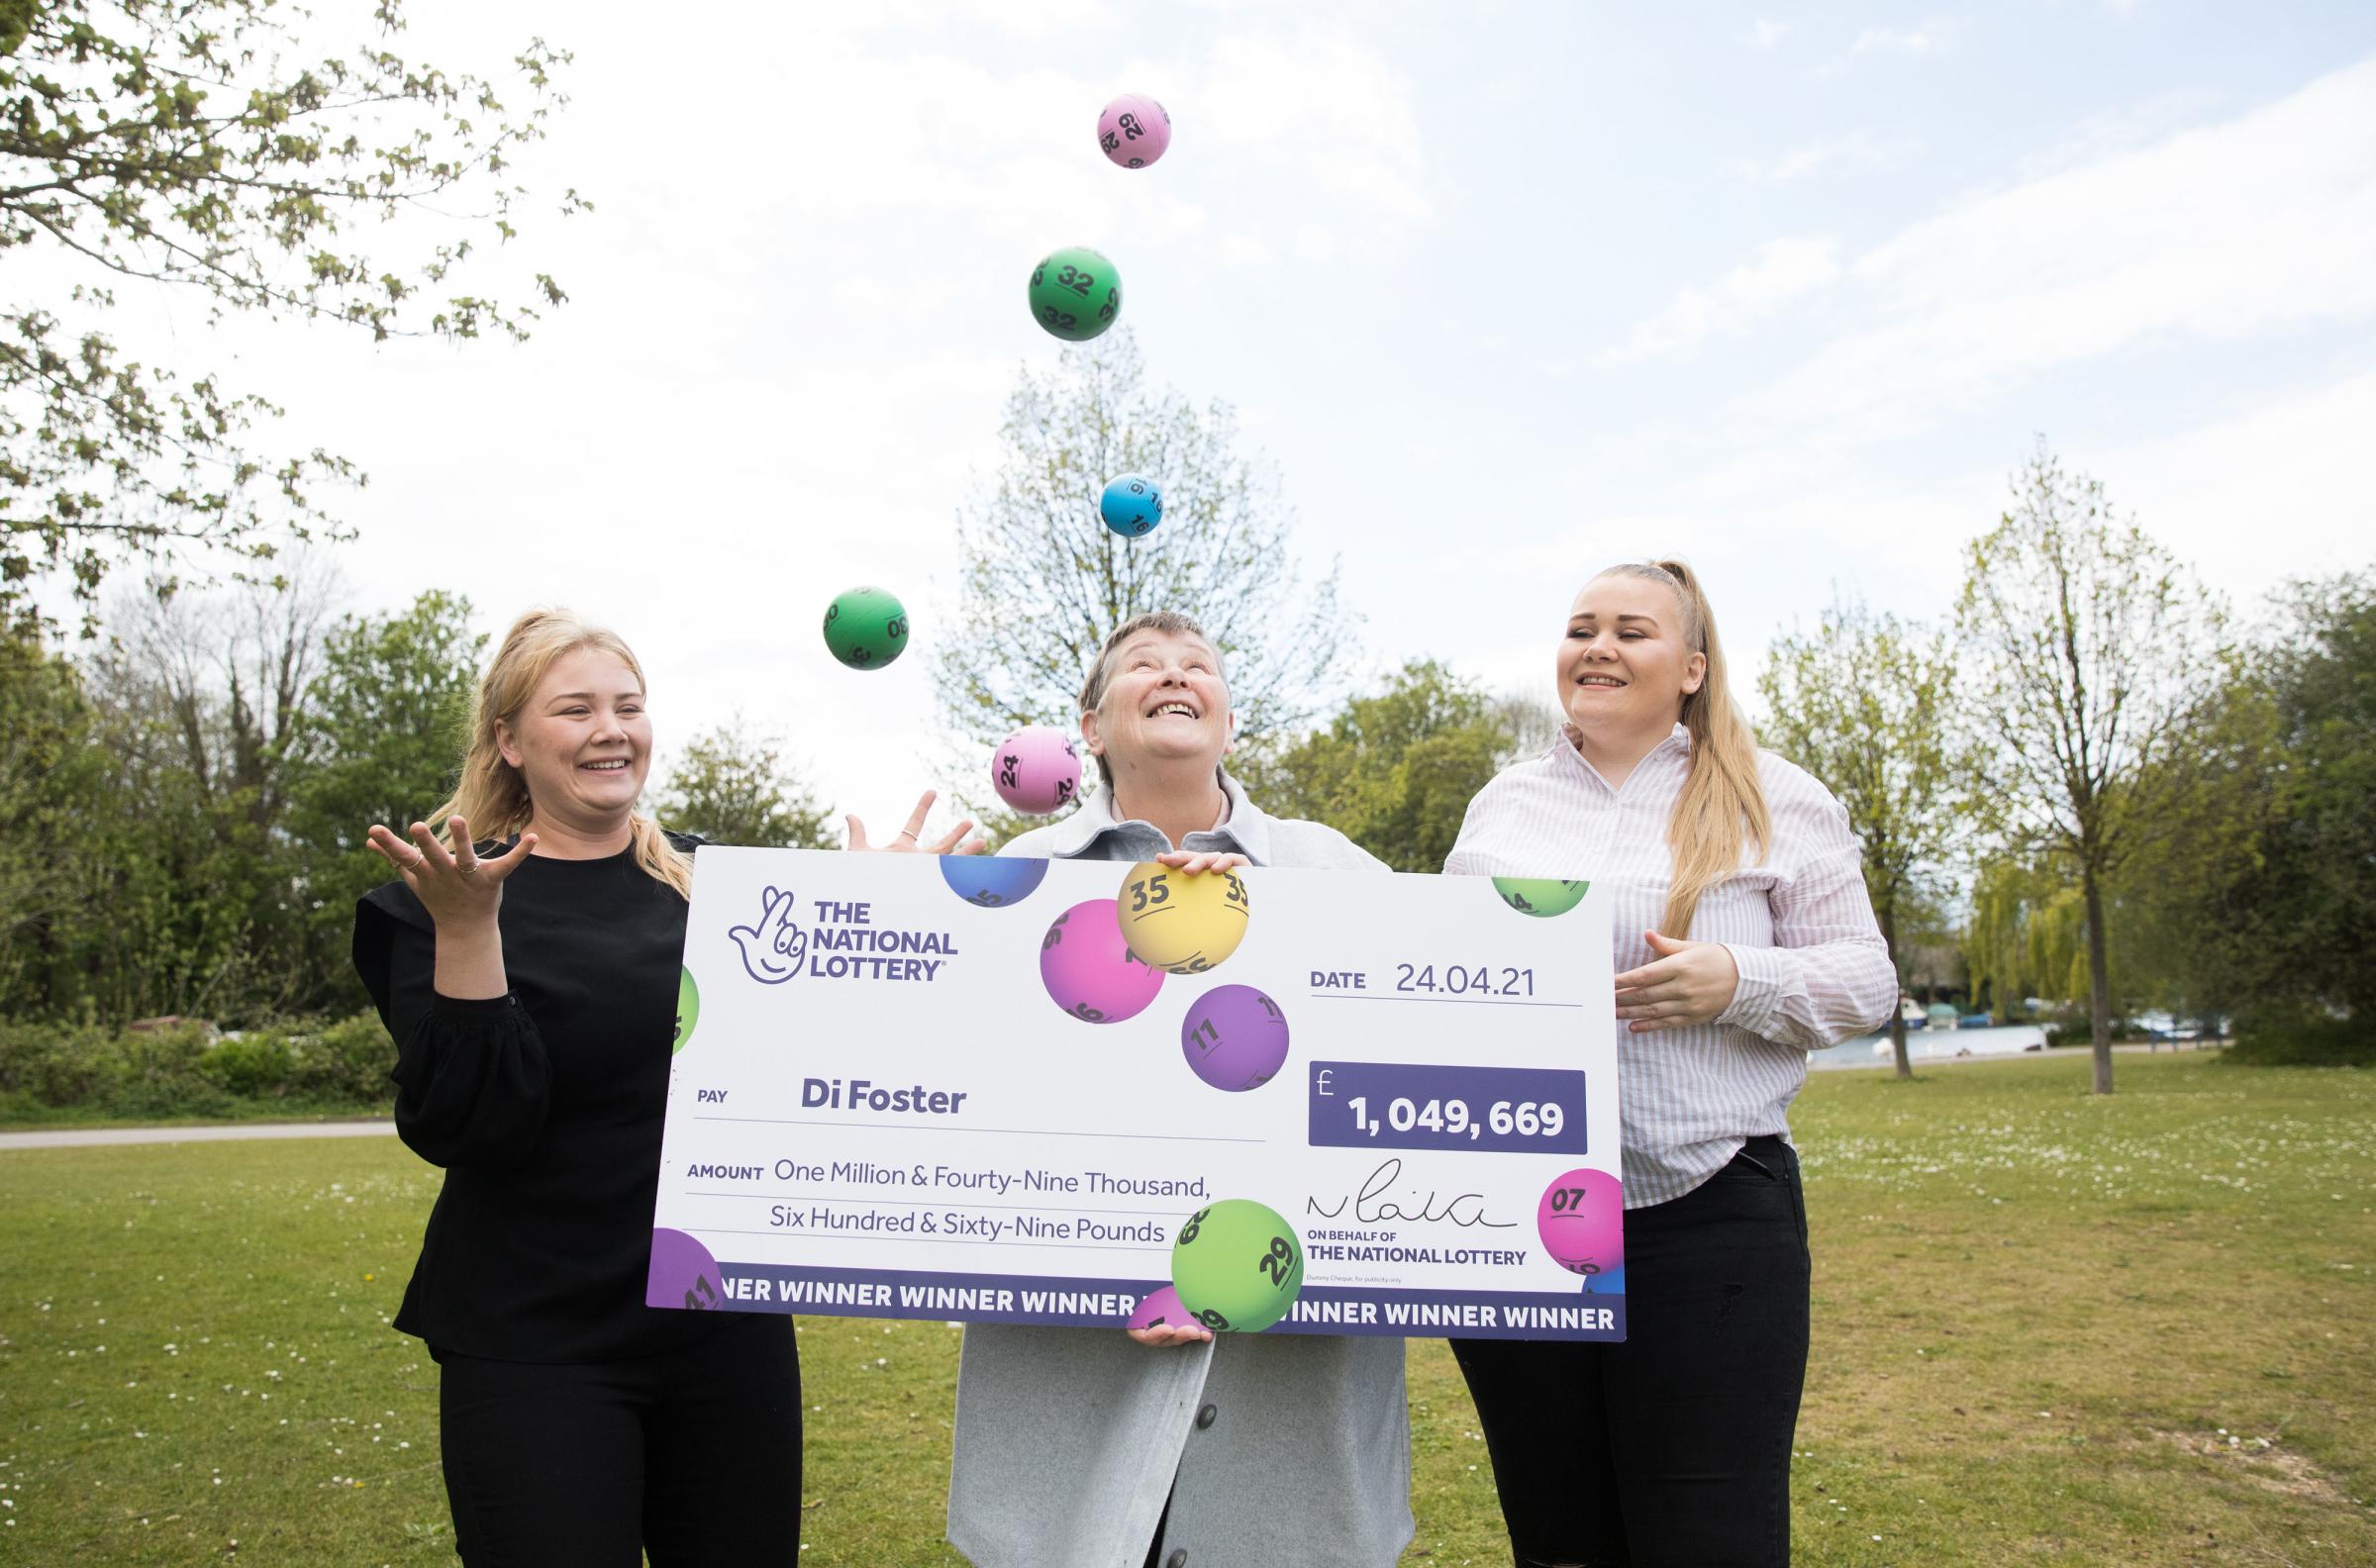 Pic: The National Lottery